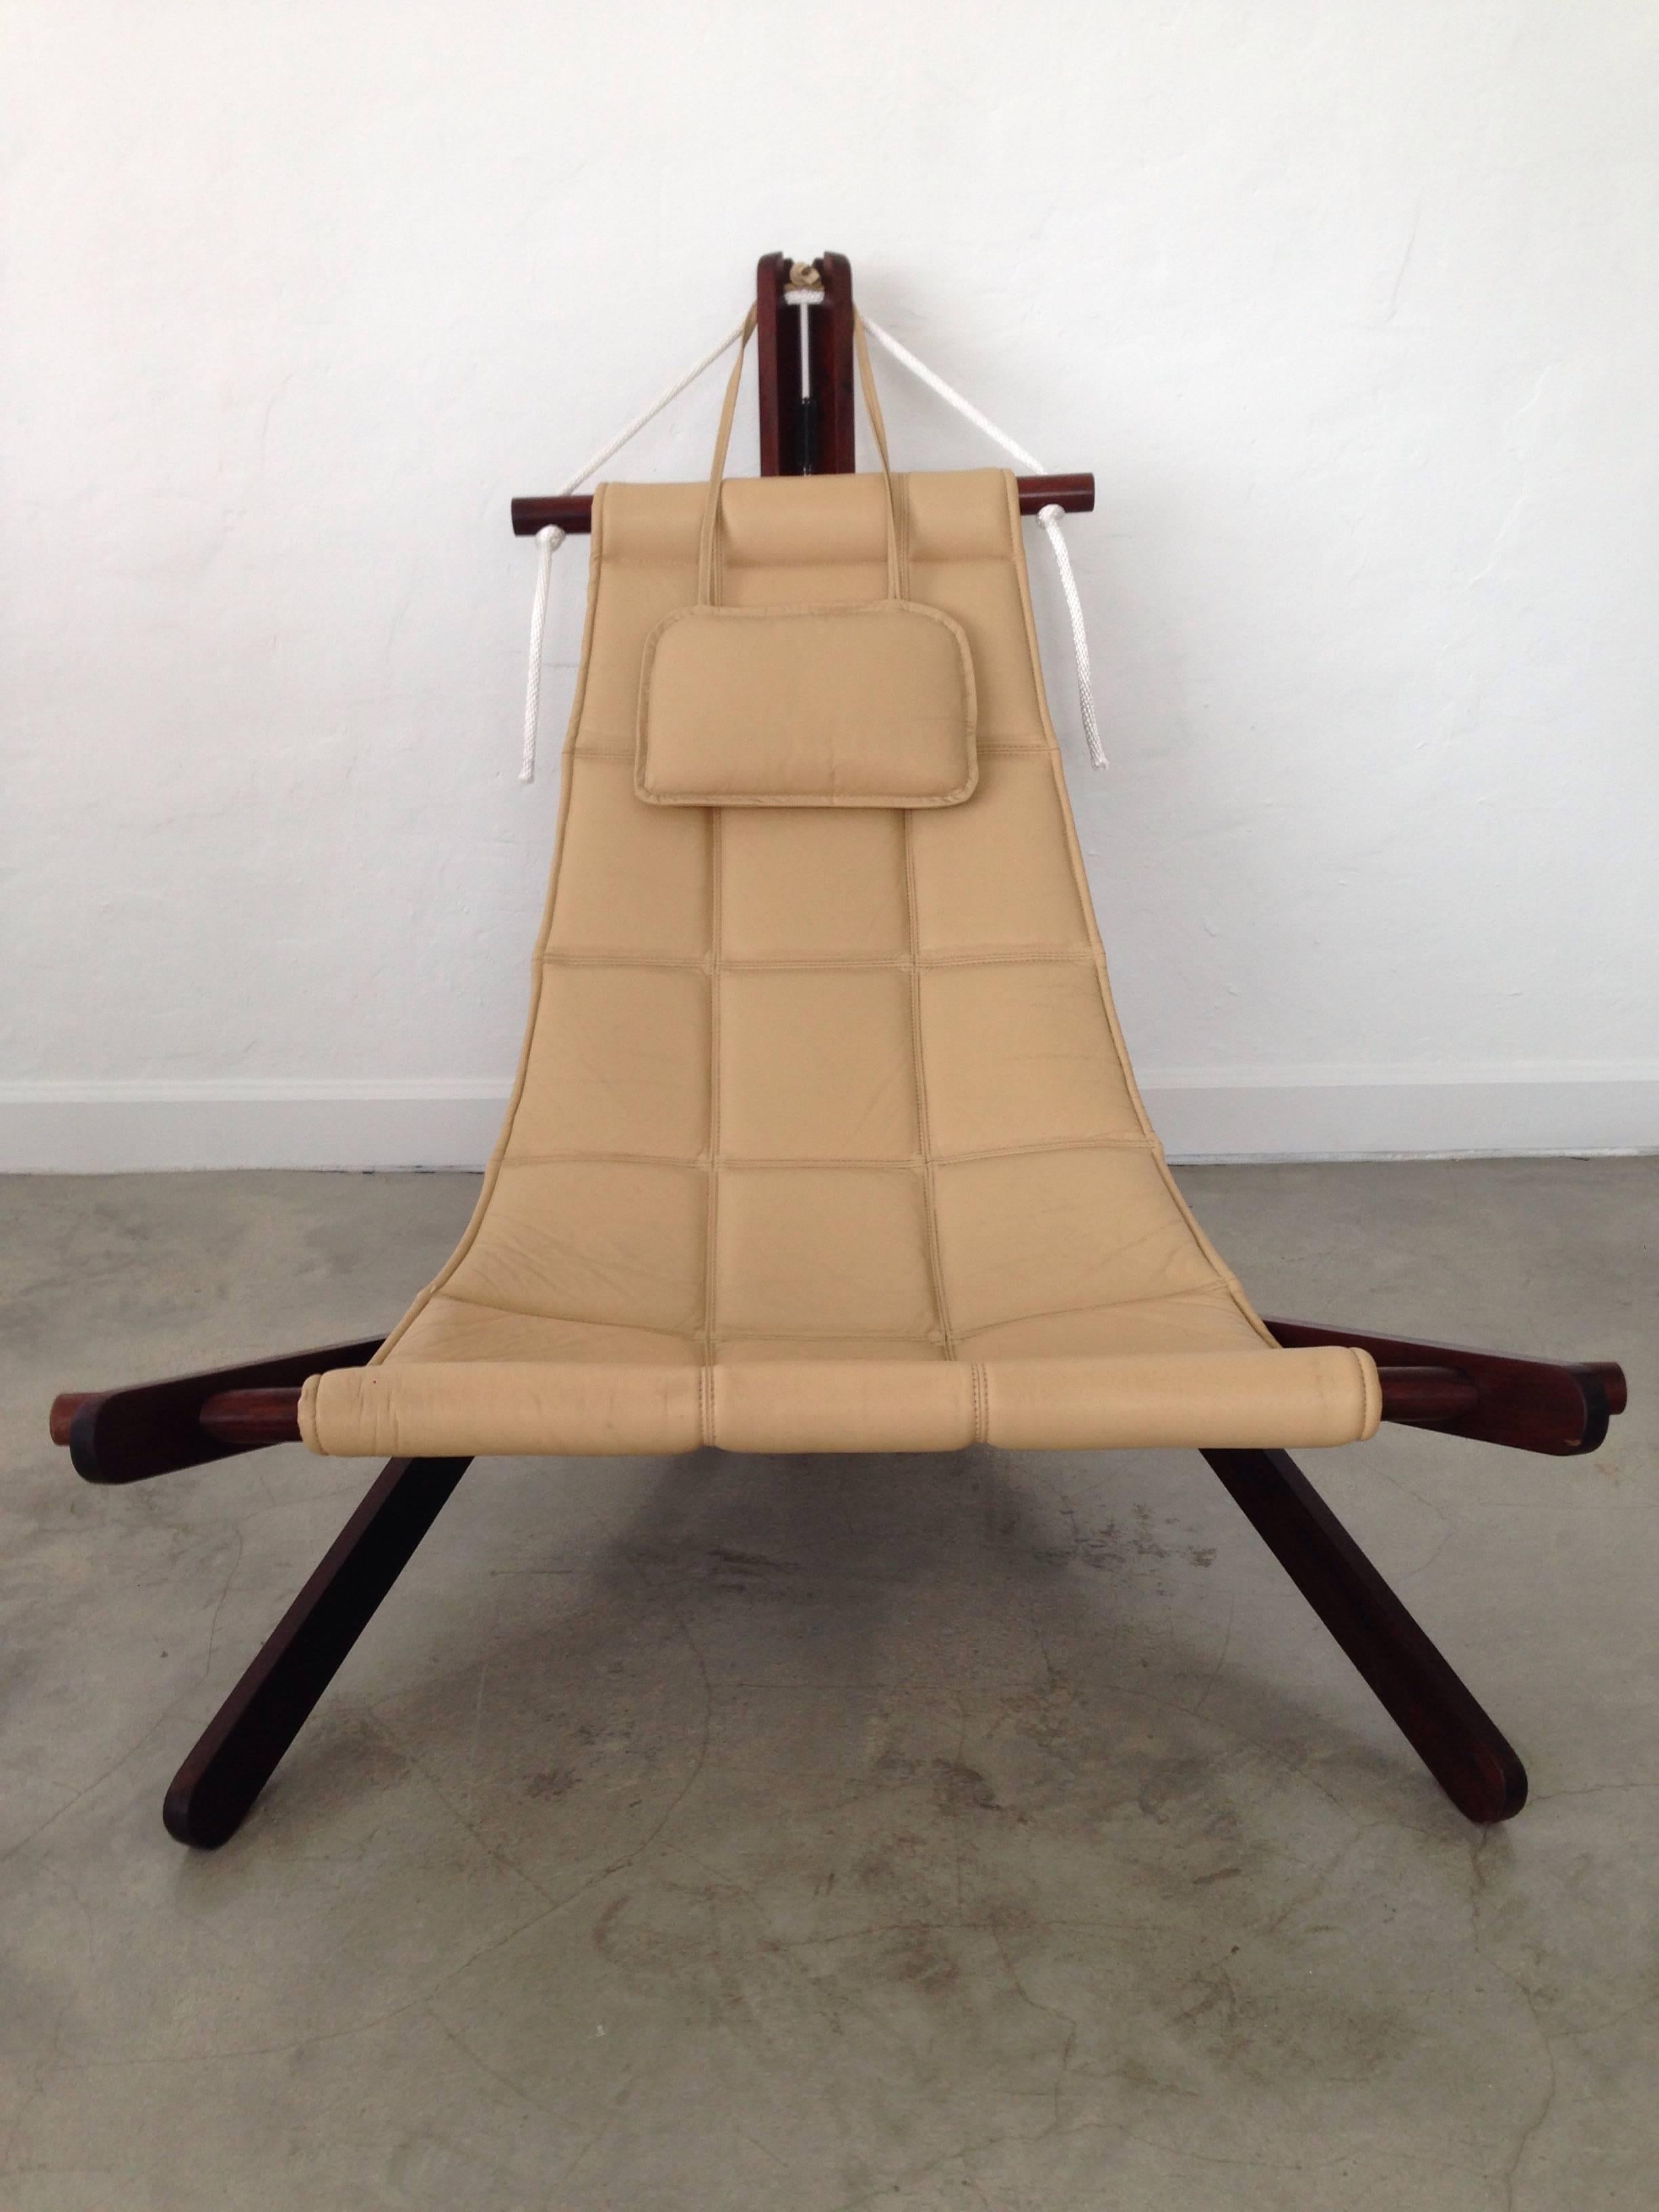 Rare and collectible sling chair in Cherry (Jatoba) wood, cream leather and rope by British architect Dominic Michaelis for Moveis Corazza, Brazil.